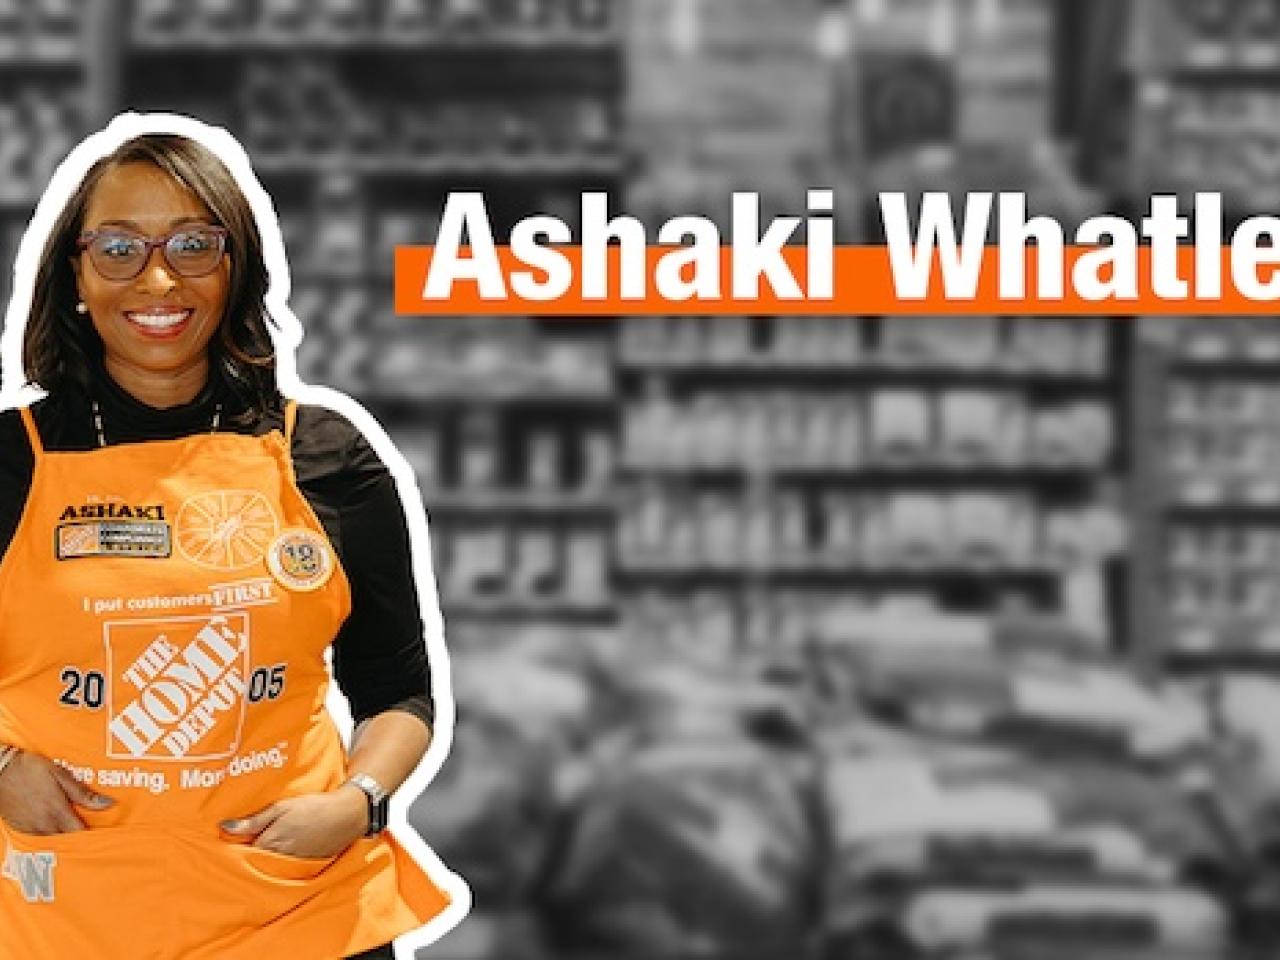 Ashaki Whatley, The Home Depot, shown smiling and wearing an orange apron.